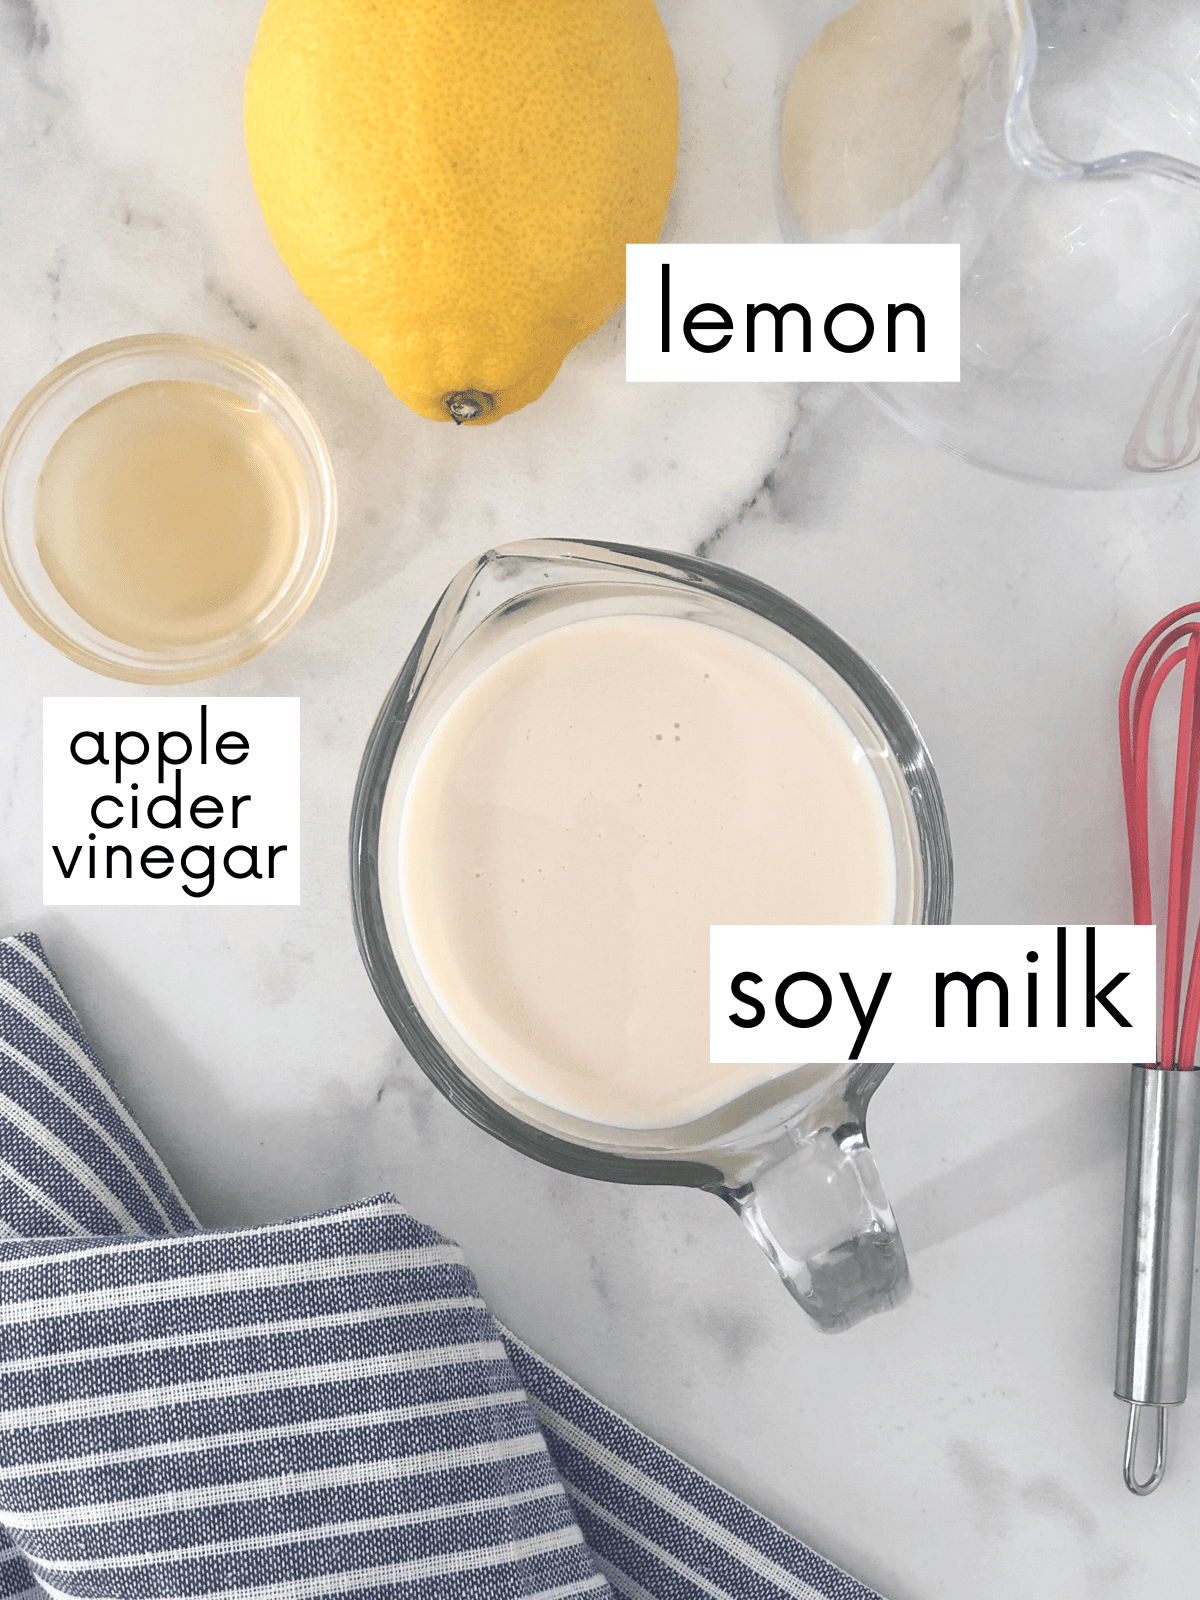 Ingredients for homemade buttermilk measured out in separate dishes.